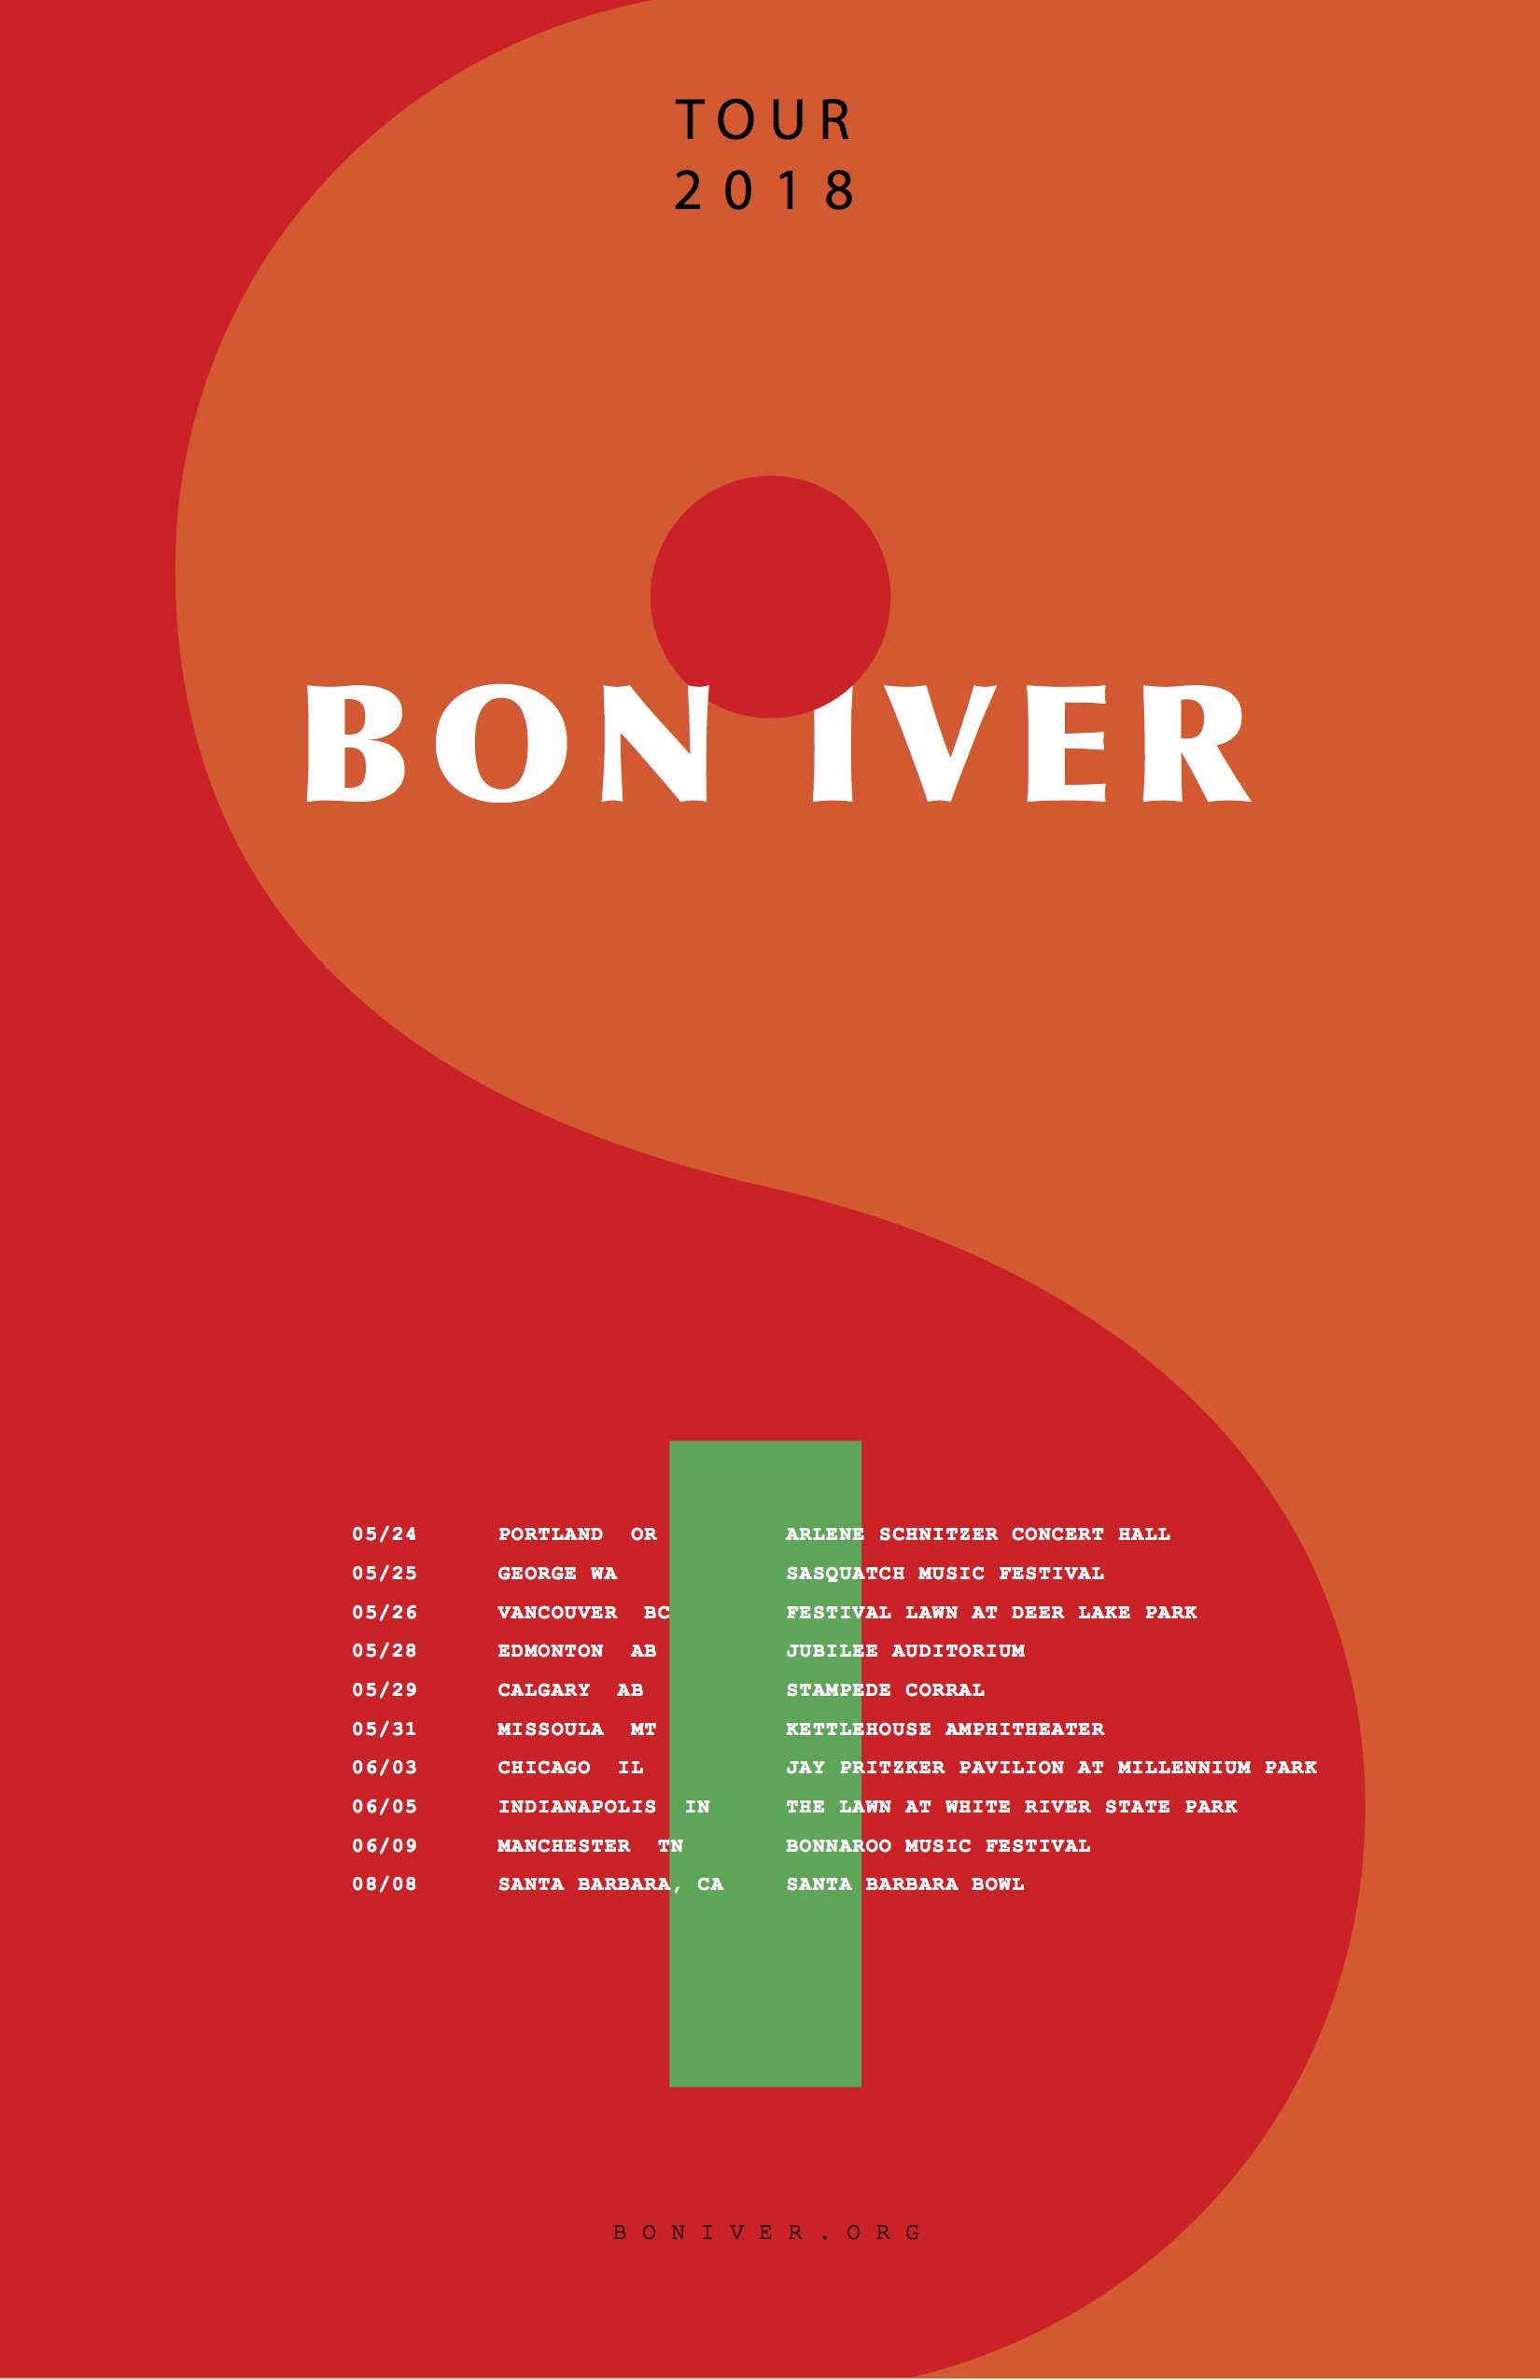 Bon Iver Twitter: "We're excited announce some tour dates in the this summer! https://t.co/aCpug6LsGR fan club presale tickets will be available for purchase with a unique code. Assigned codes